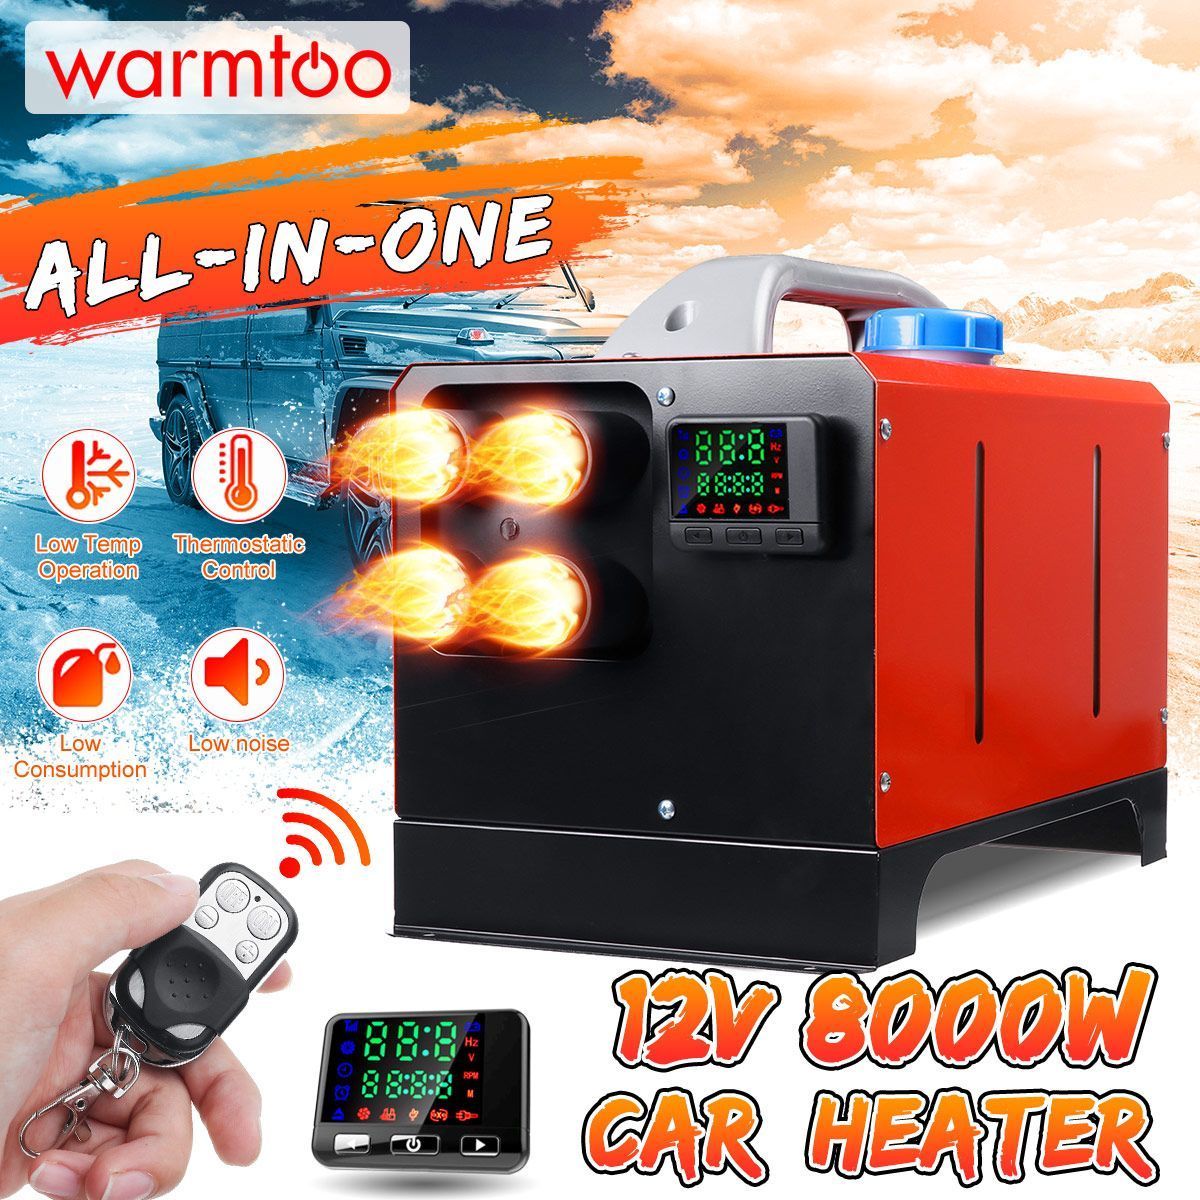 Warmtoo-All-In-One-12V-8KW-Diesel-Air-Heater-Car-Parking-Heater-Wireless-Remote-Control-LCD-Display-1754108